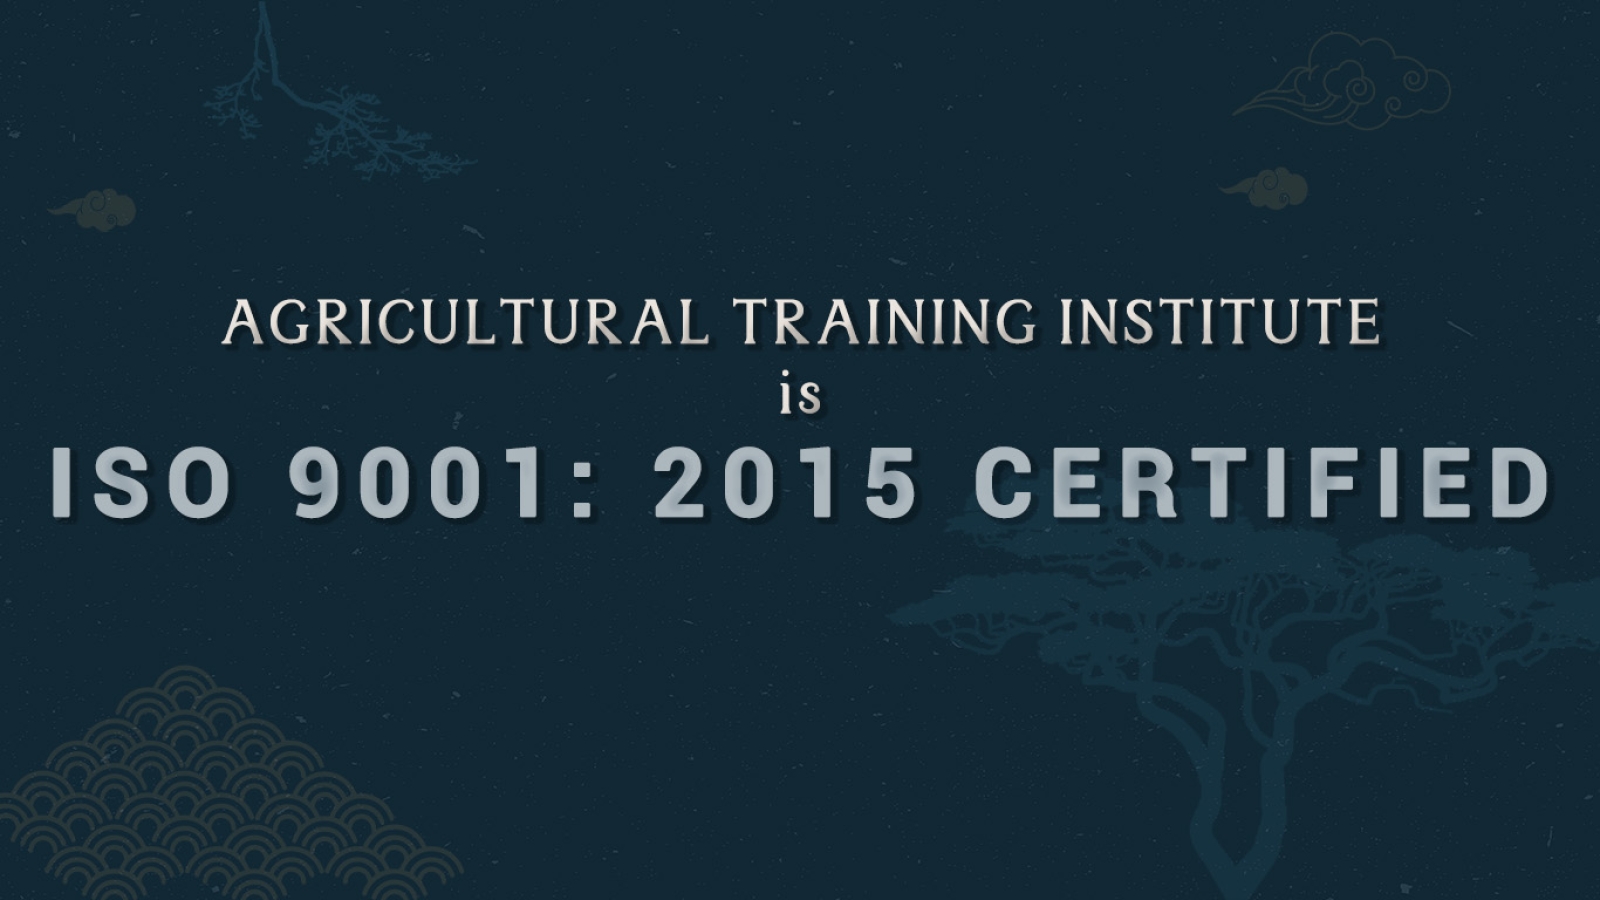 Agricultural Training Institute is ISO 9001:2015 Certified